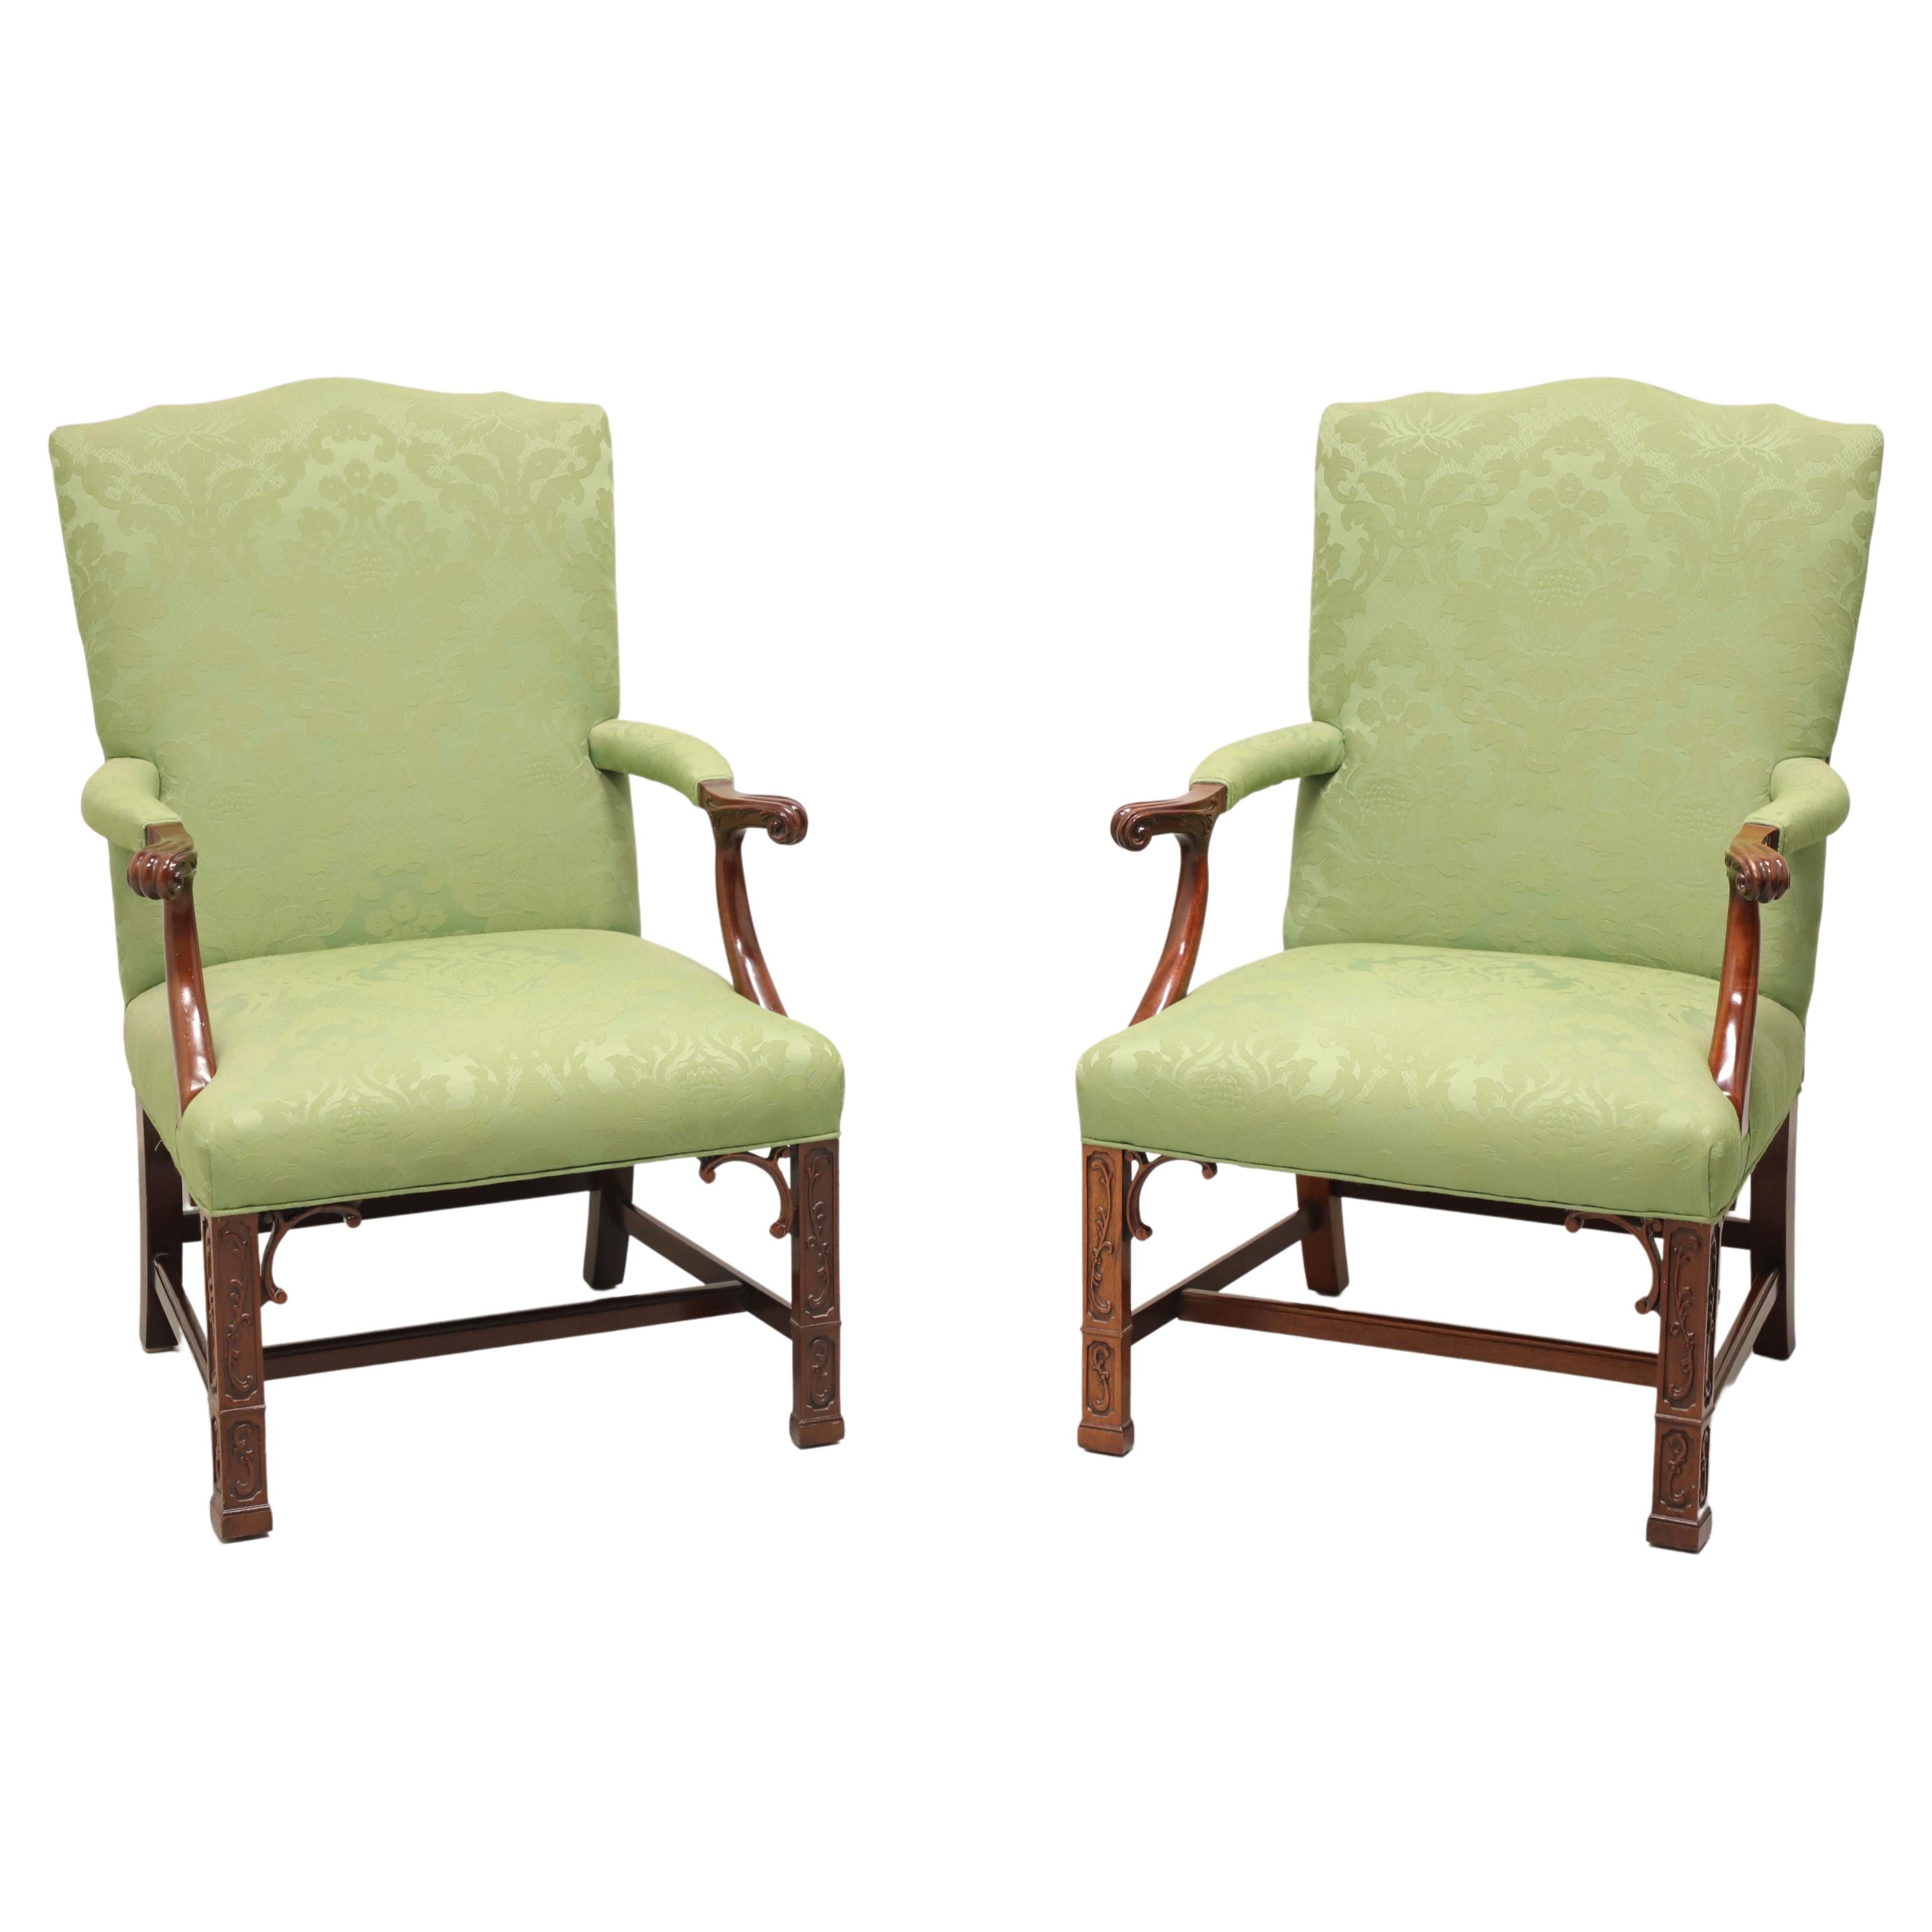 SOUTHWOOD Gainsborough Mahogany Chippendale Style Fretwork Armchairs - Pair